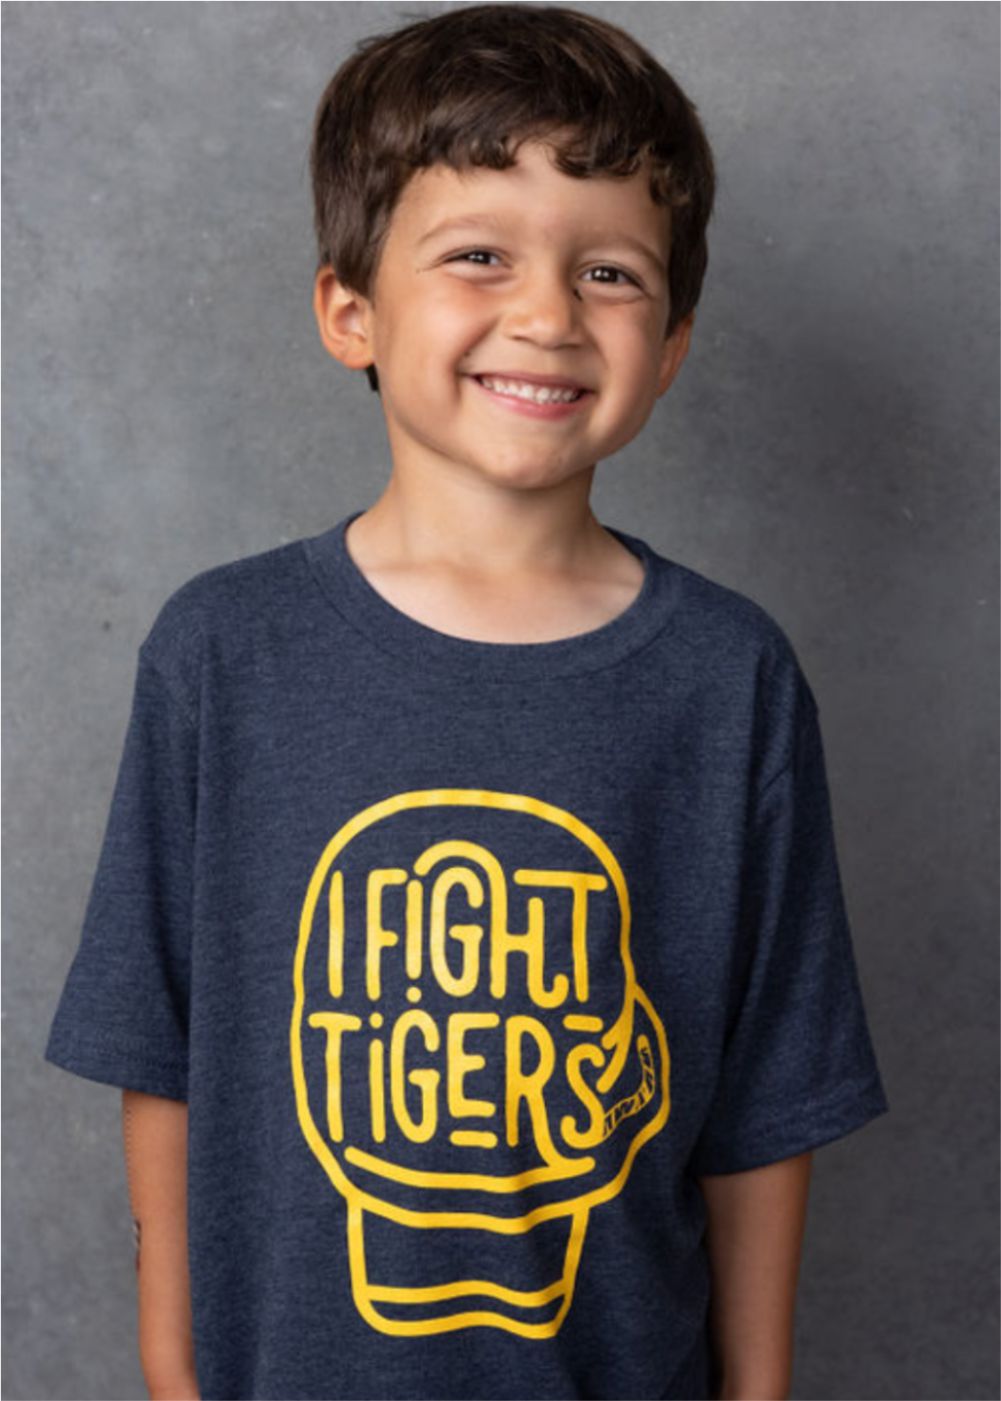 The wee ones in your life need t-shirts and hats too. This fun youth tee is a great way to  get them ready to be warriors. 